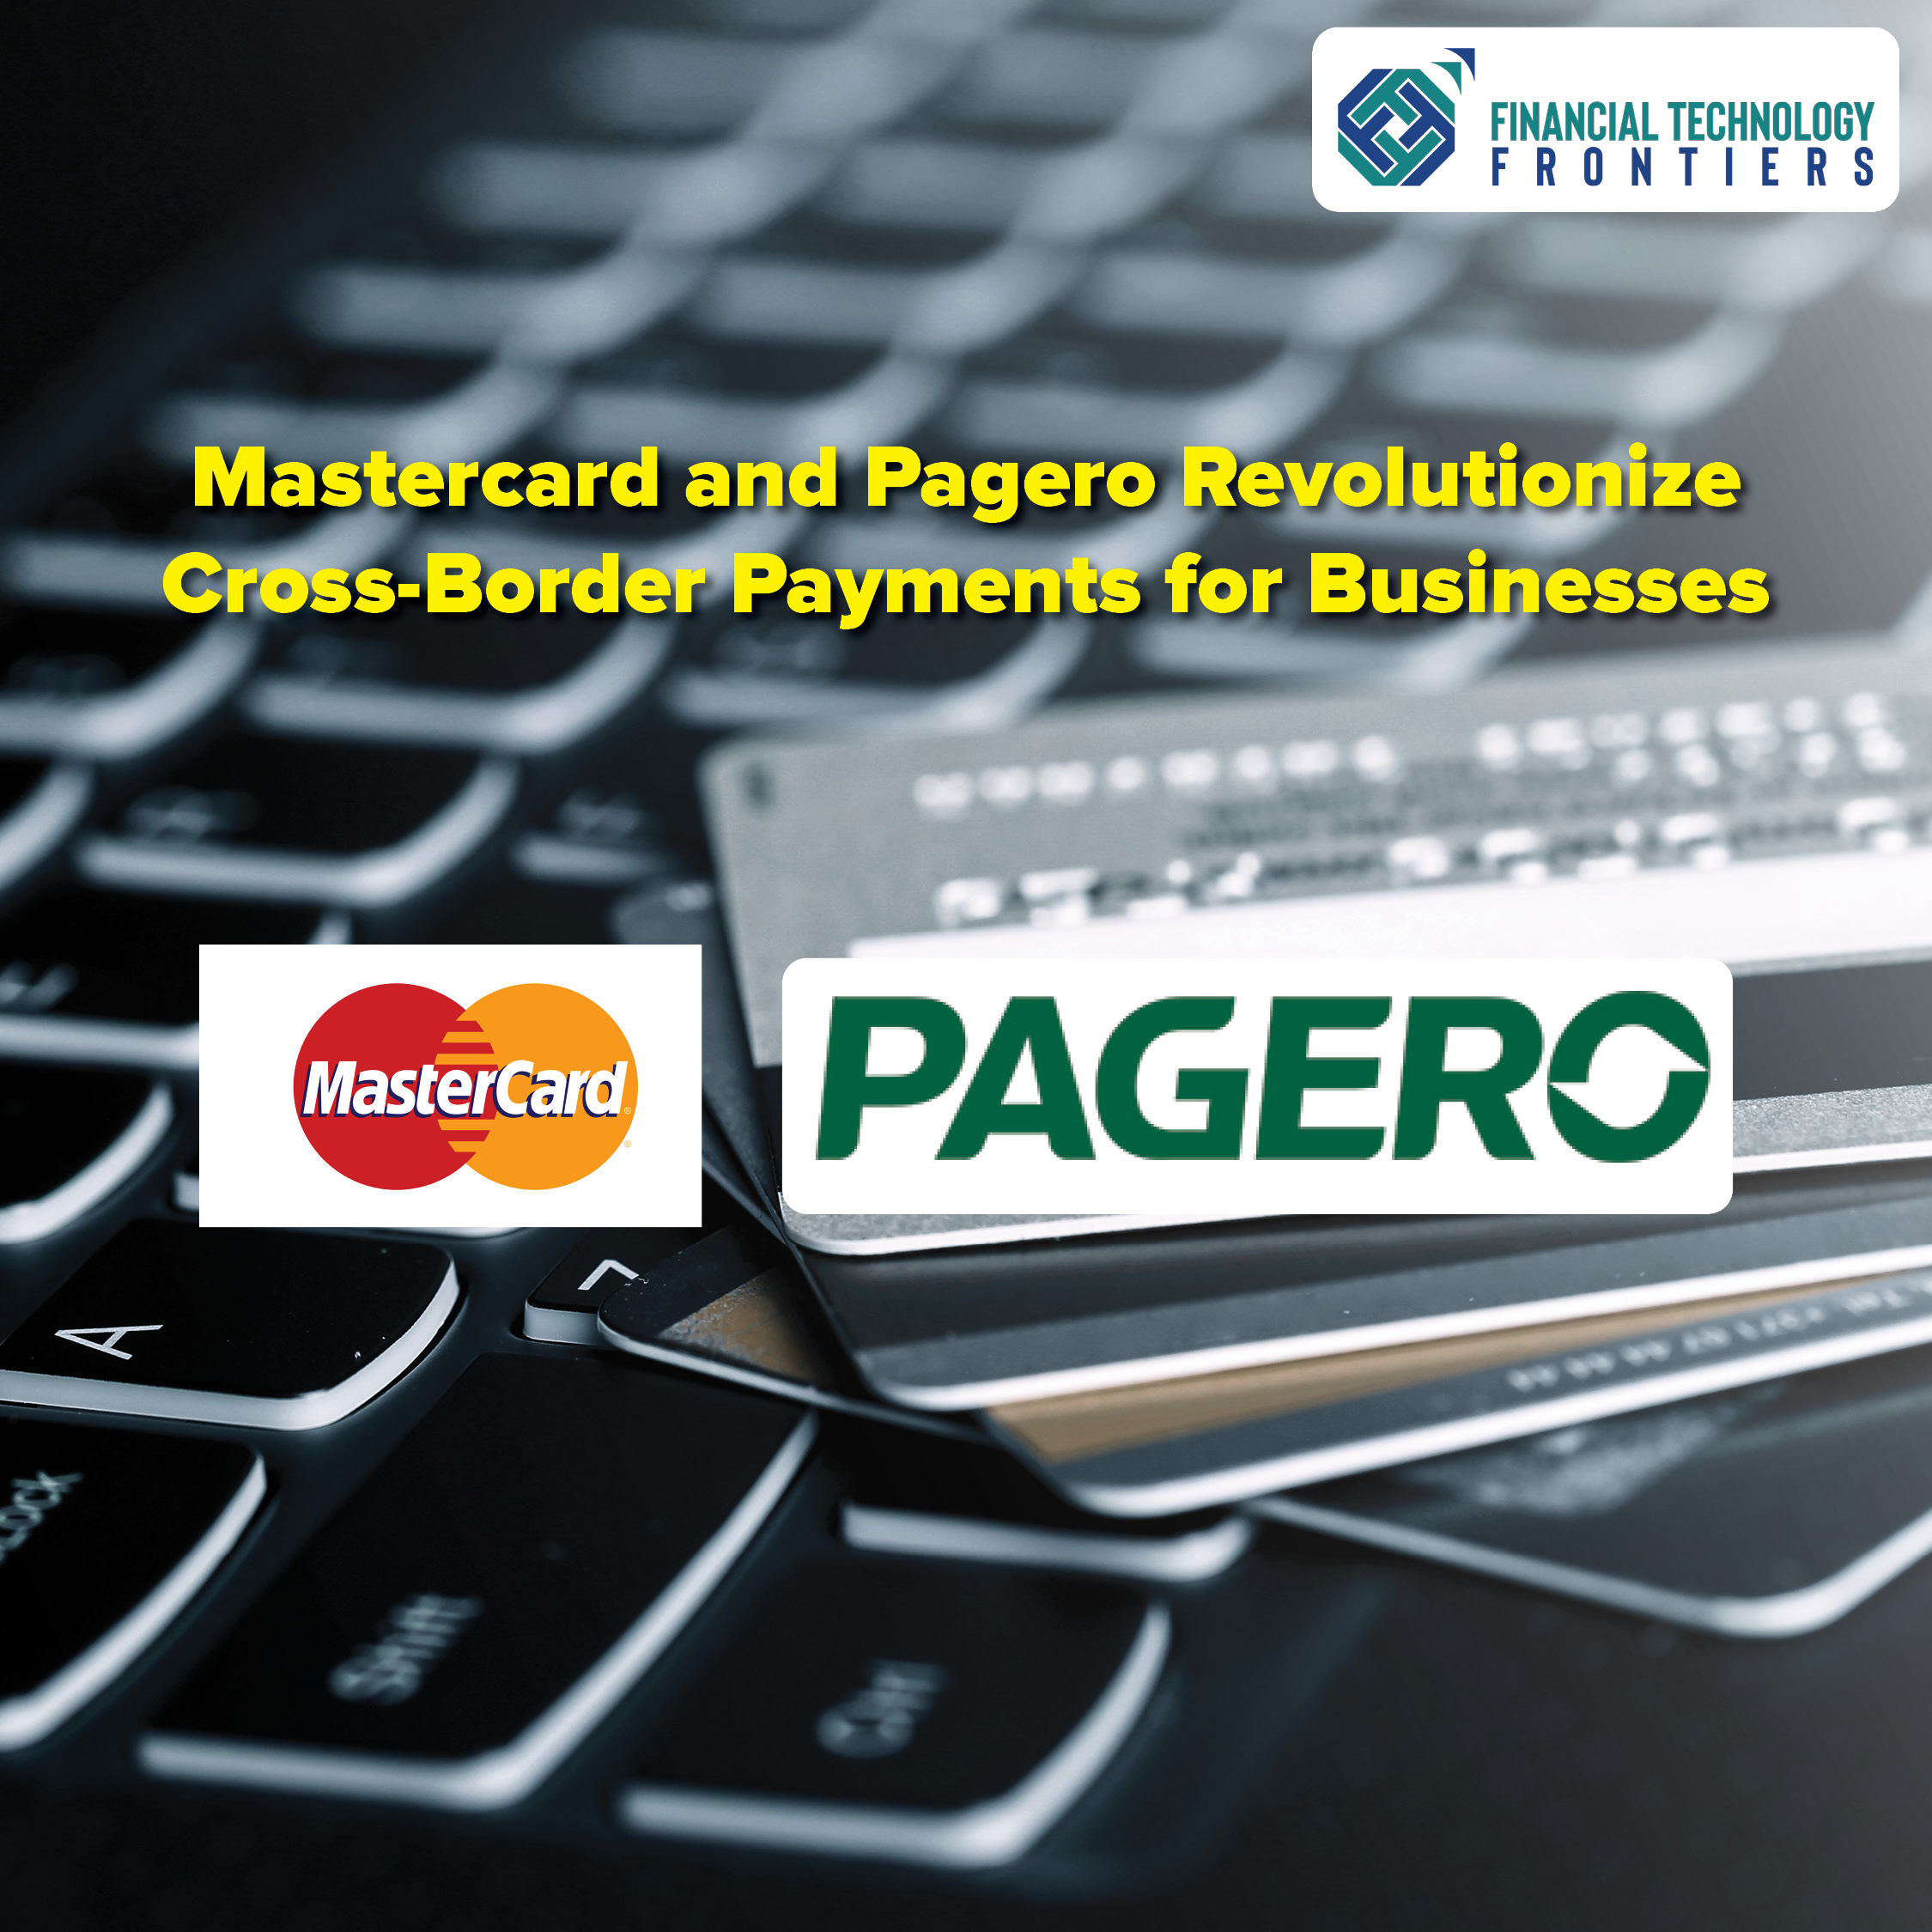 Mastercard and Pagero Revolutionize Cross-Border Payments for Businesses